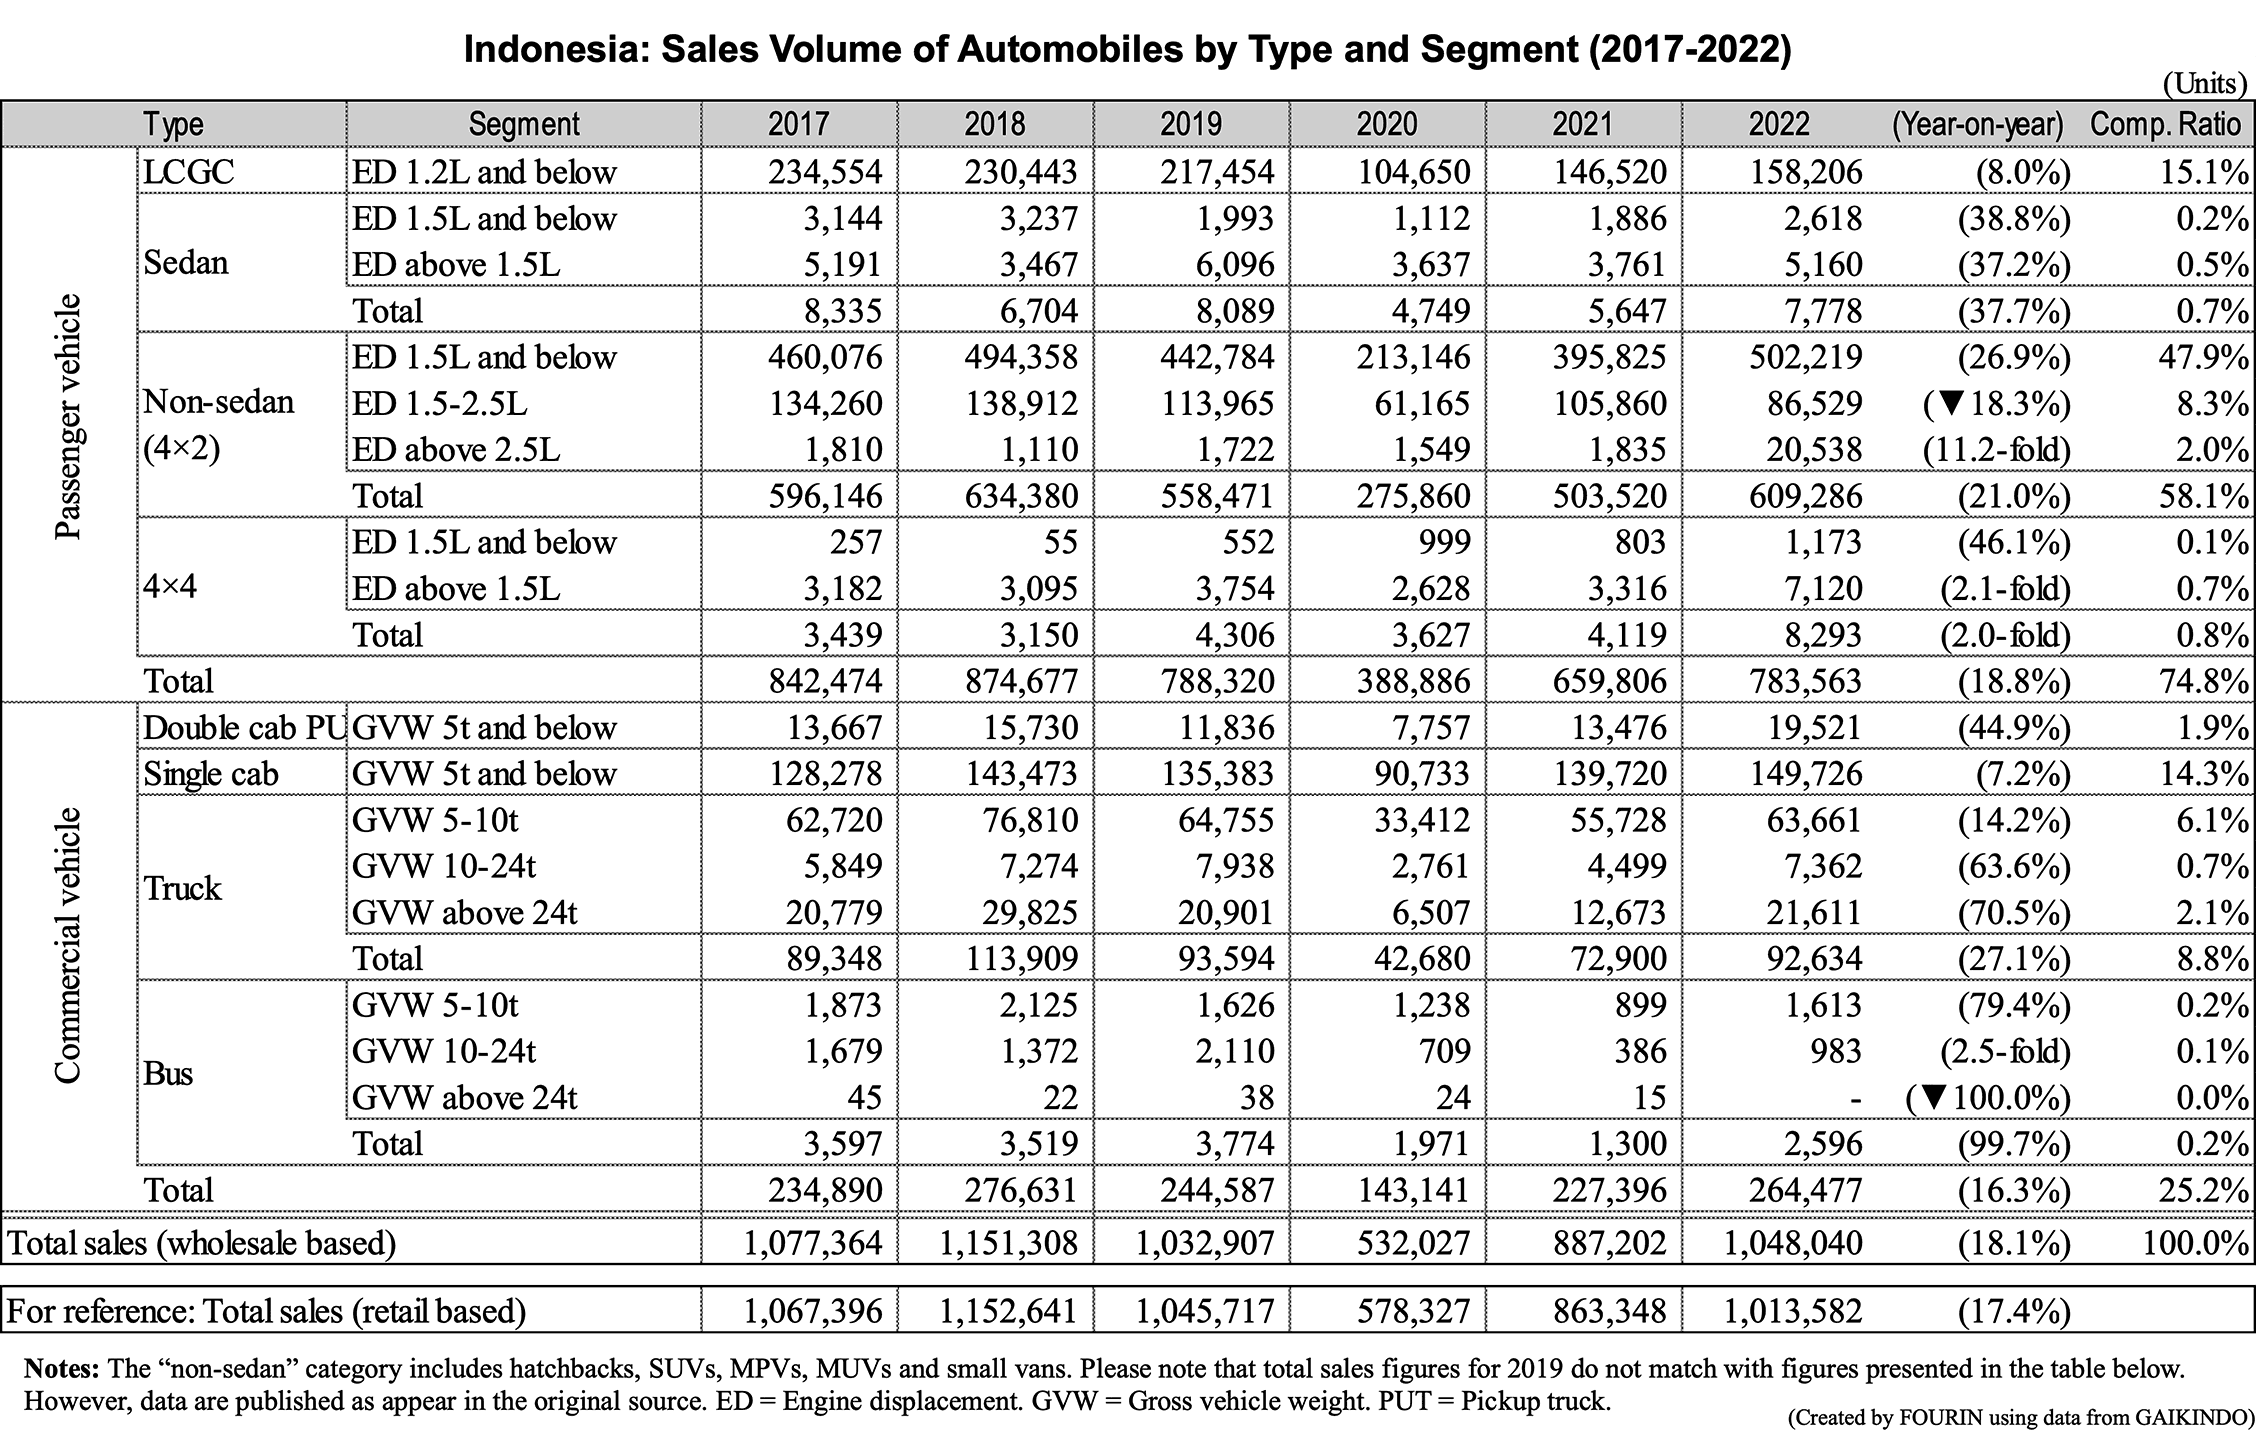 Table data: Indonesia: Sales Volume of Automobiles by Type and Segment (2017-2022)